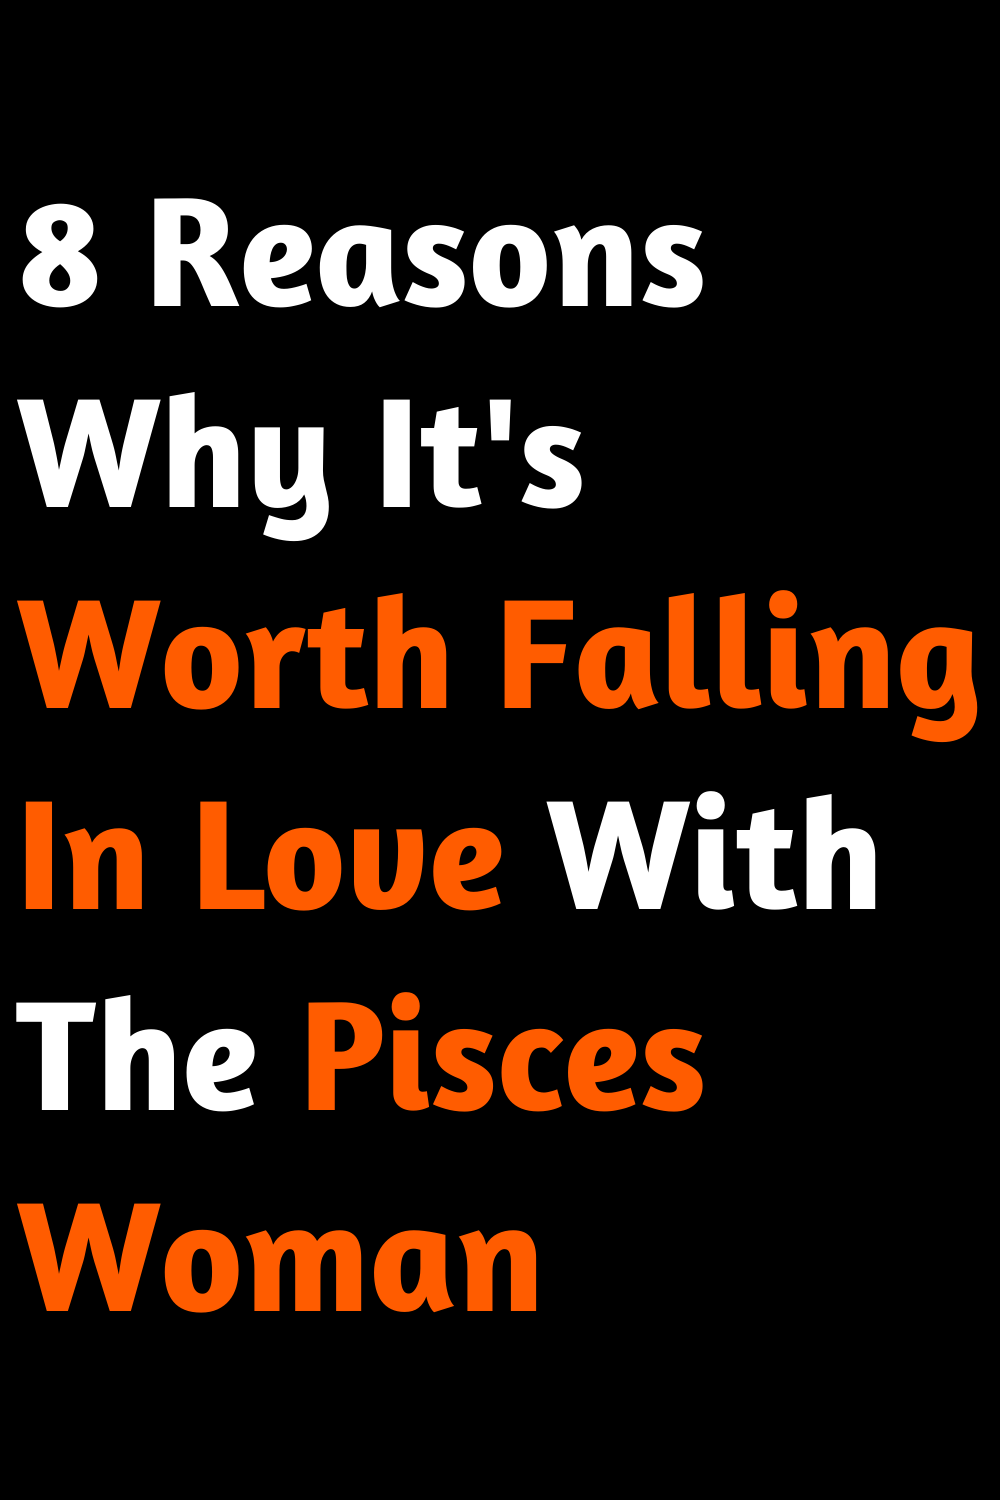 8 Reasons Why It's Worth Falling In Love With The Pisces Woman